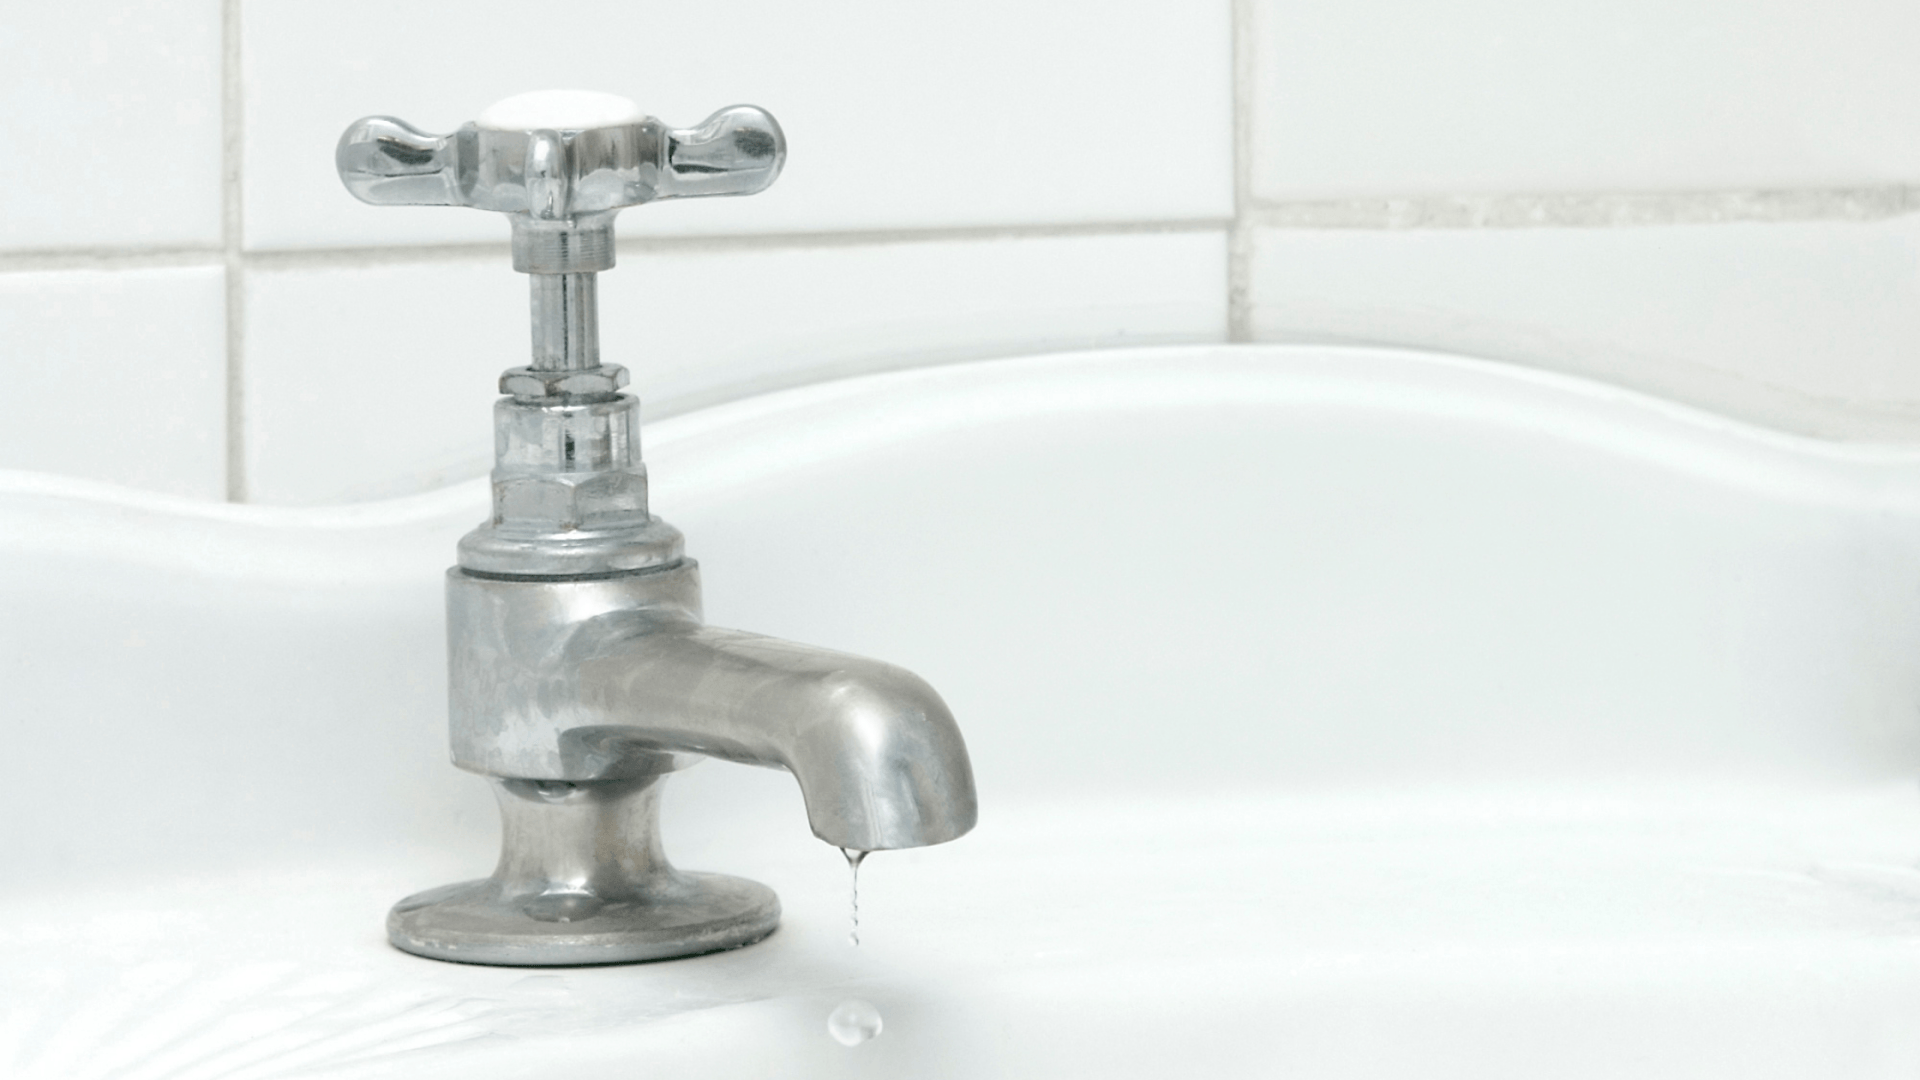 Leaking tap into the sink at home